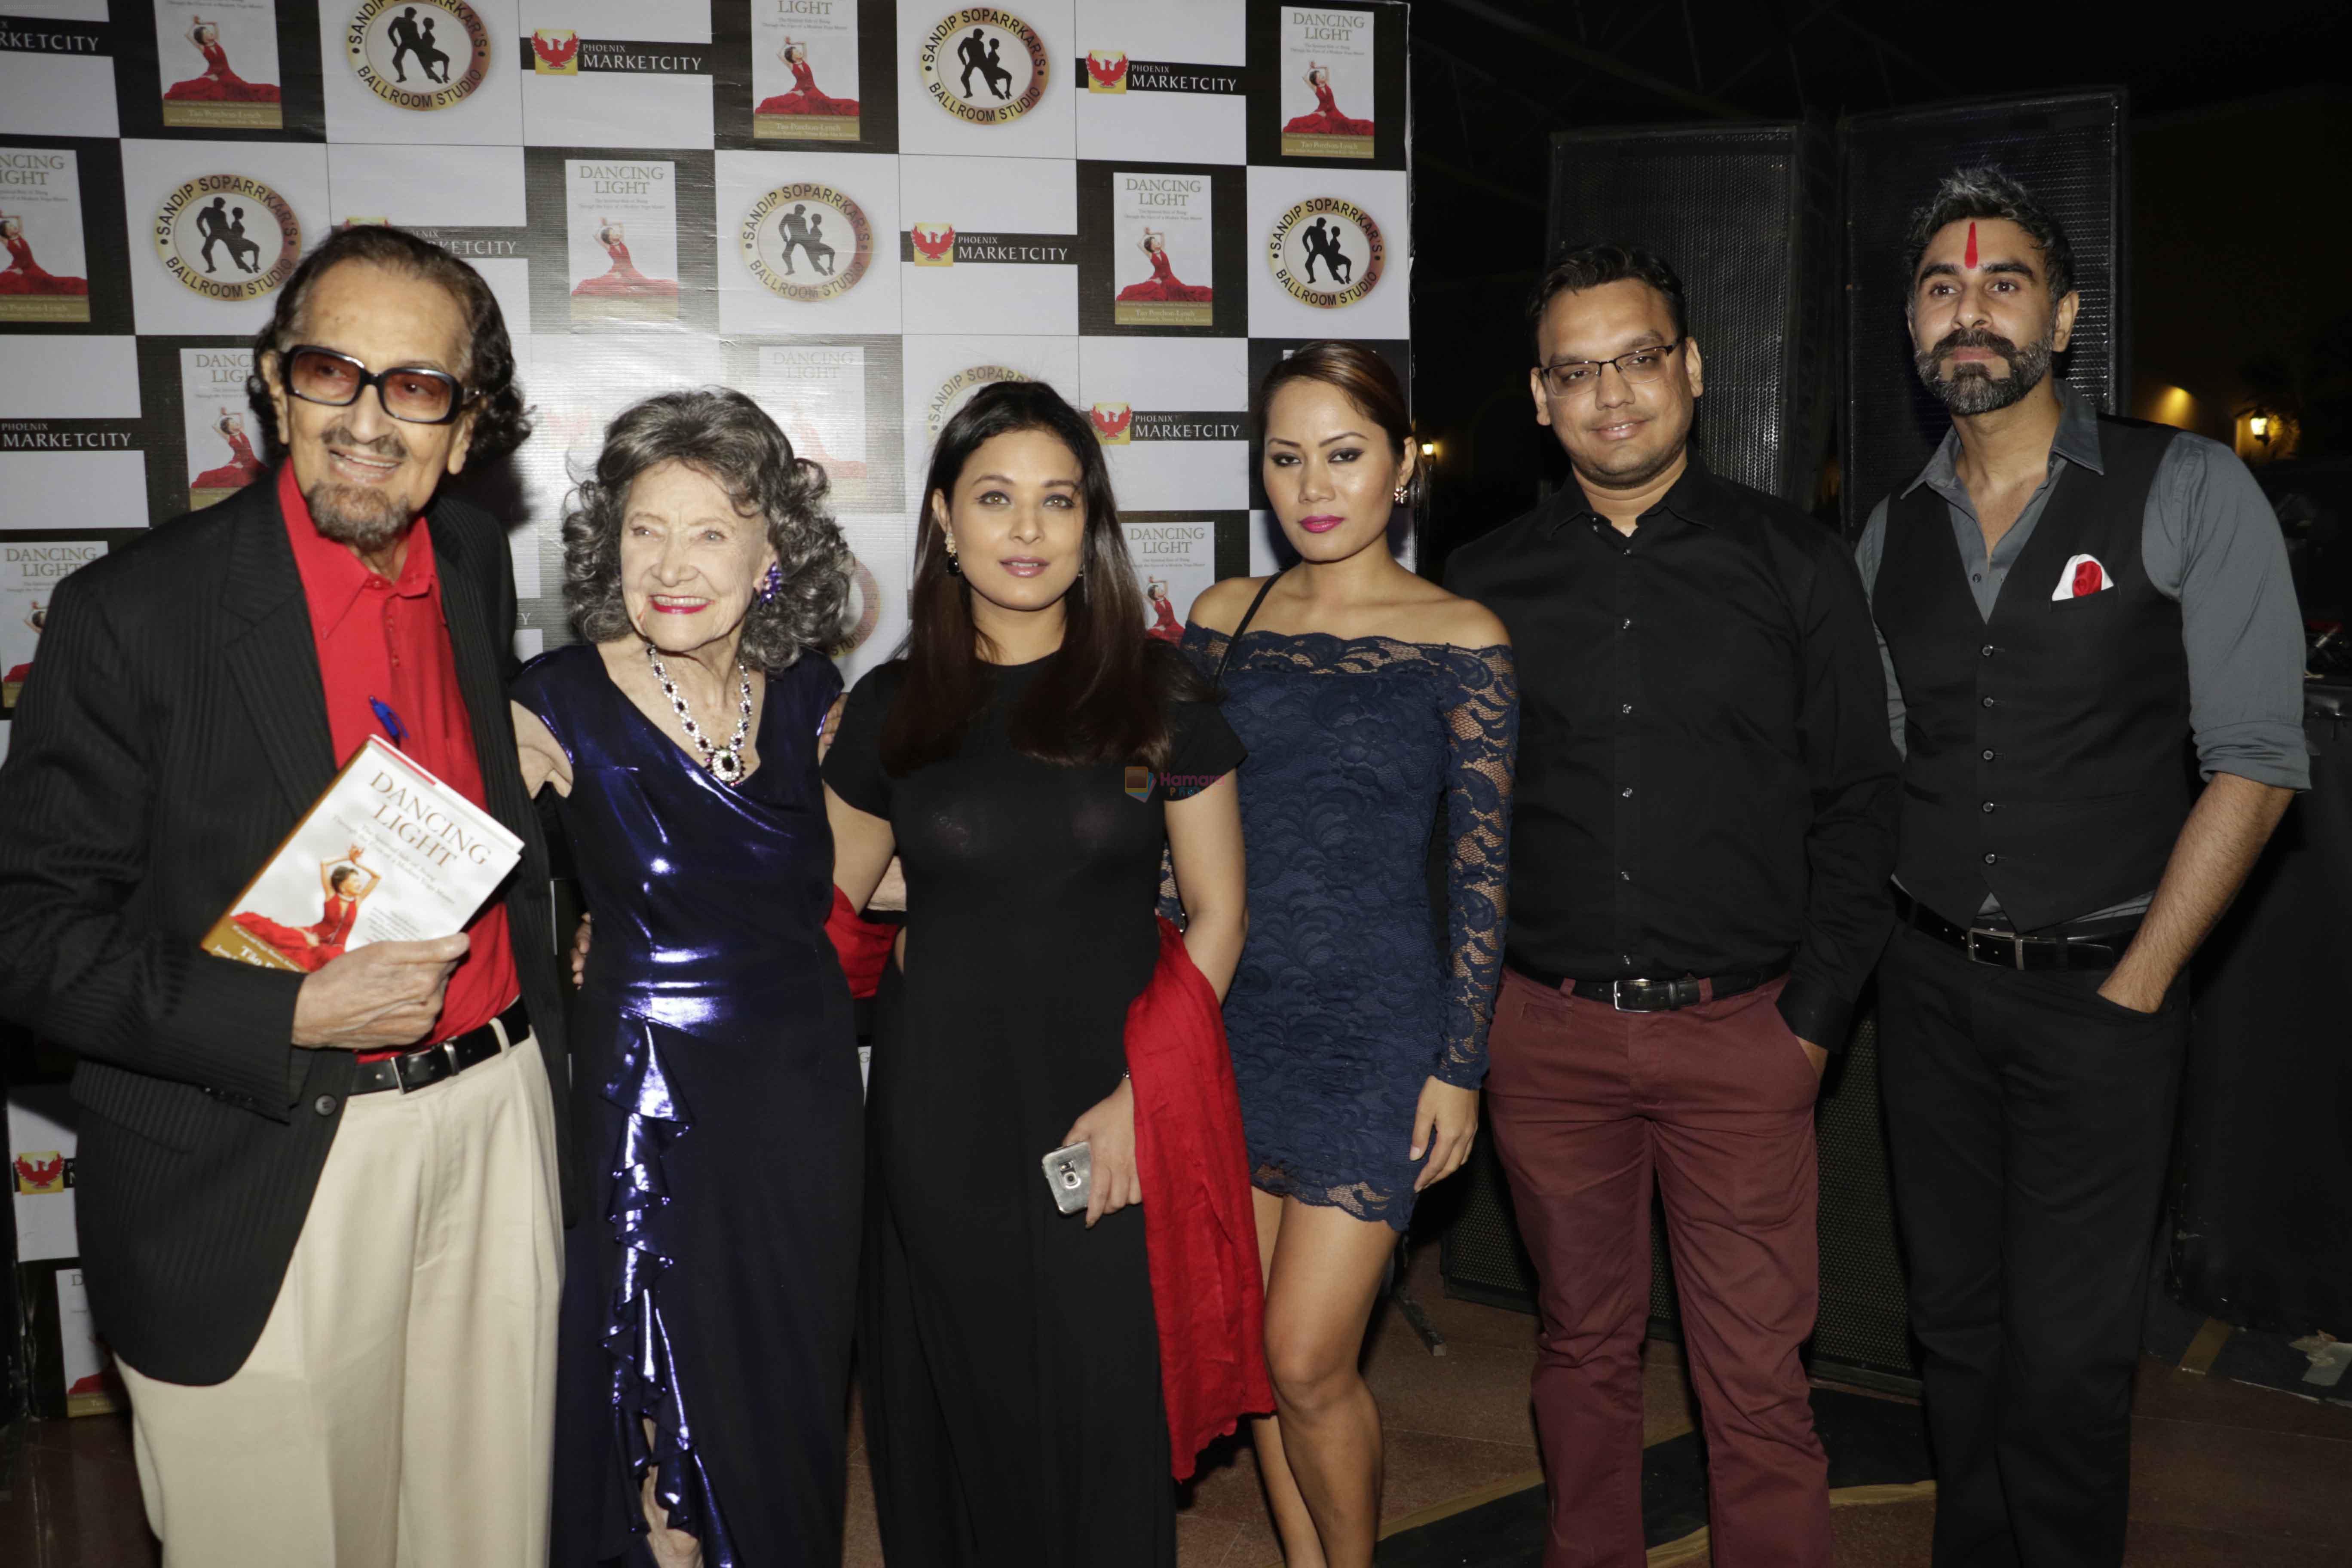 Alyque Padamsee, Sandip Soparrkar, Sarbani Mukharjee and Tao Porchon Lychn at the launch of Dancing Light autobiography of Ms Tao Porchon-Lynch on 26th Dec 2015